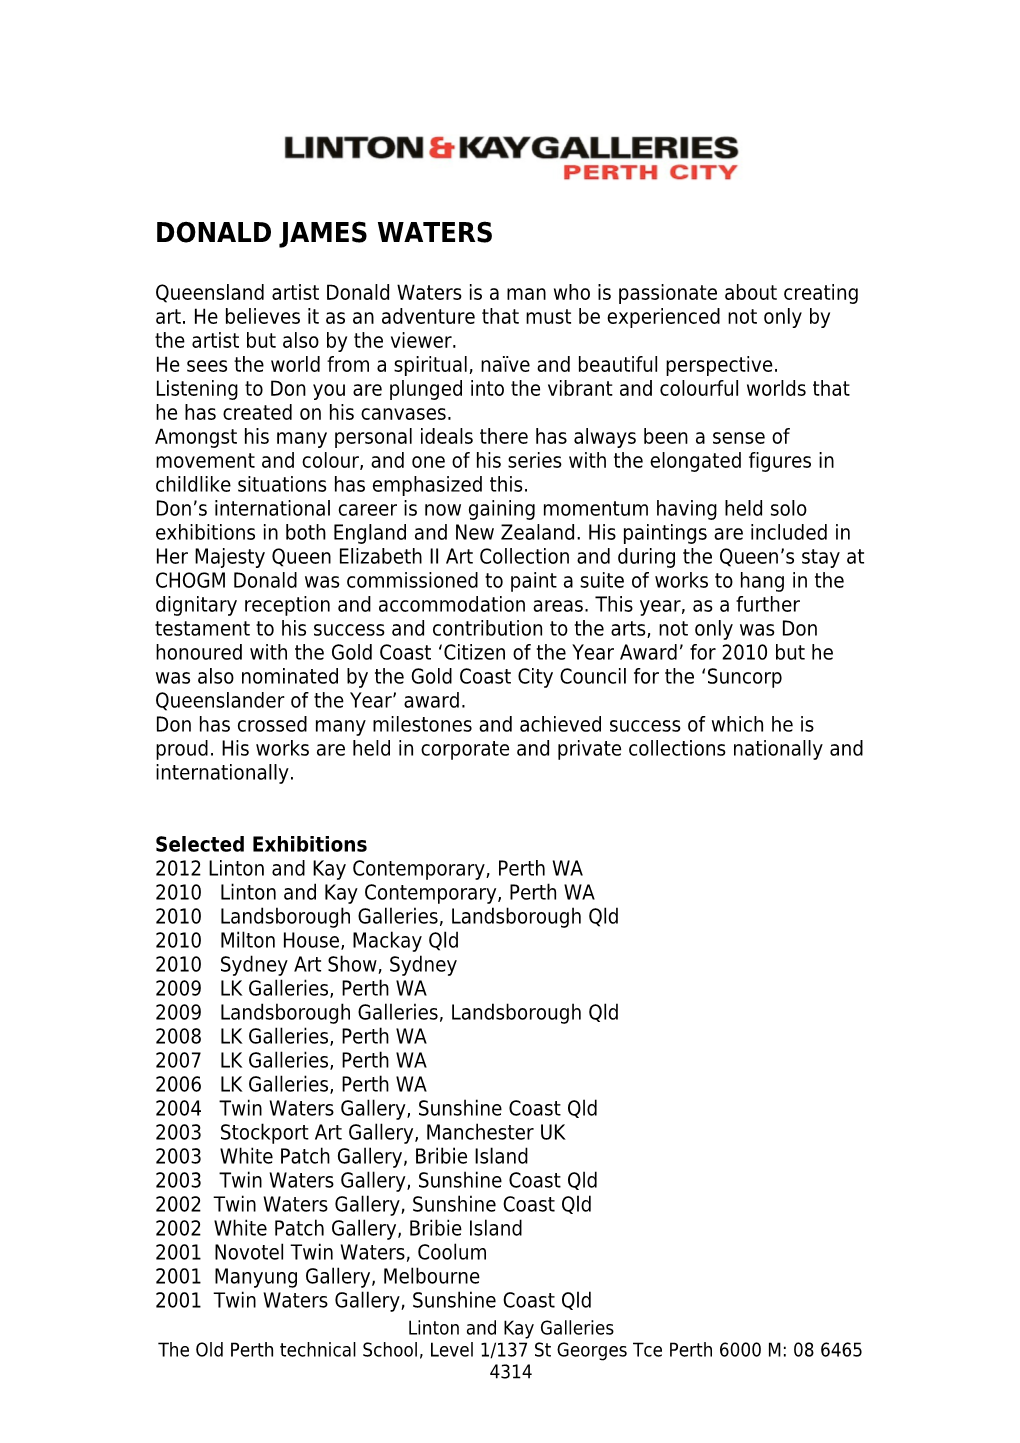 Donald James Waters